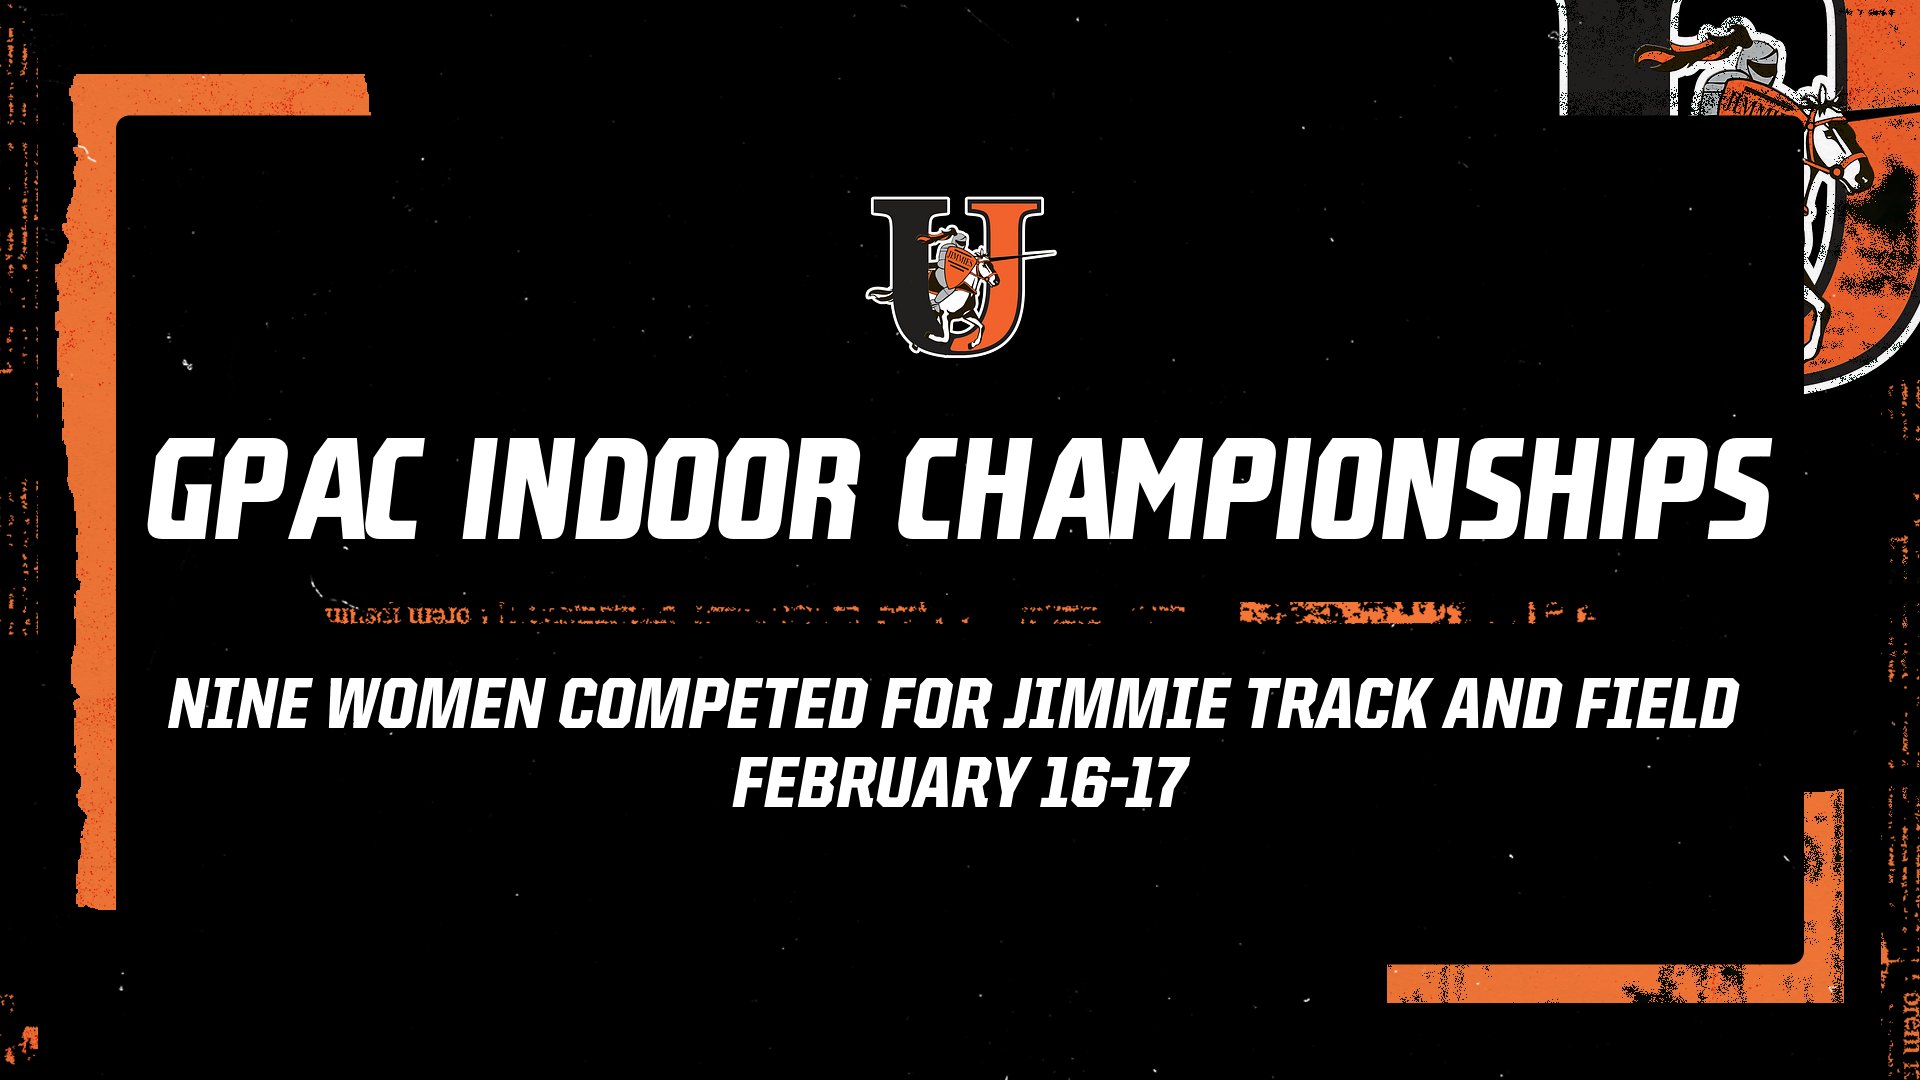 Women's track & field - nine women competed at the GPAC Indoor Championships